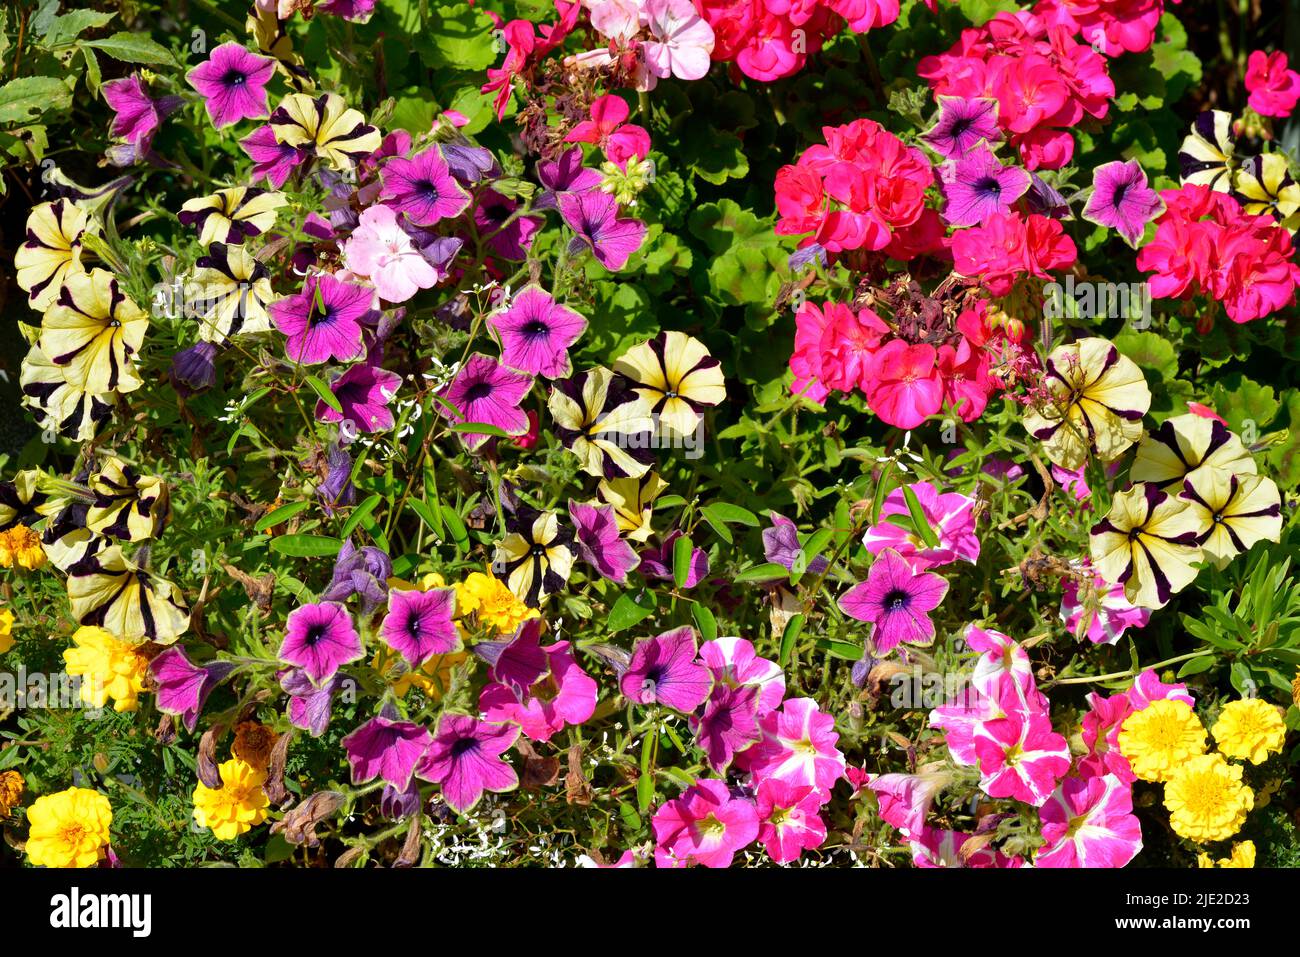 Many varieties of petunias in a french garden Stock Photo